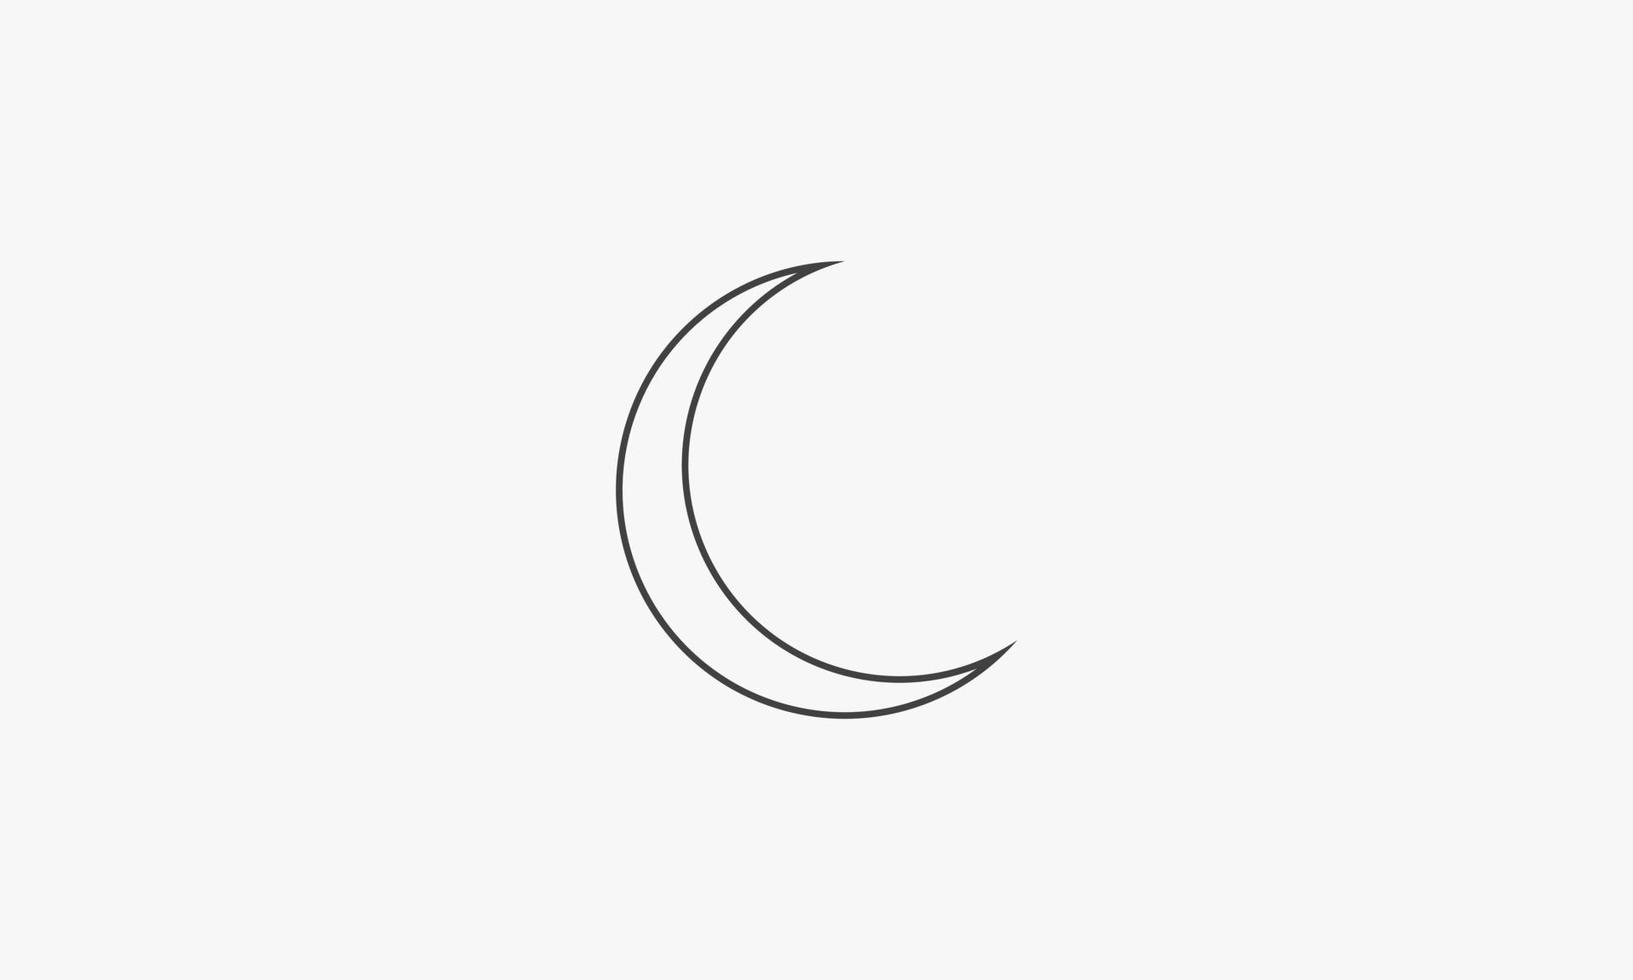 lsimple line icon crescent moon isolated on white background. vector